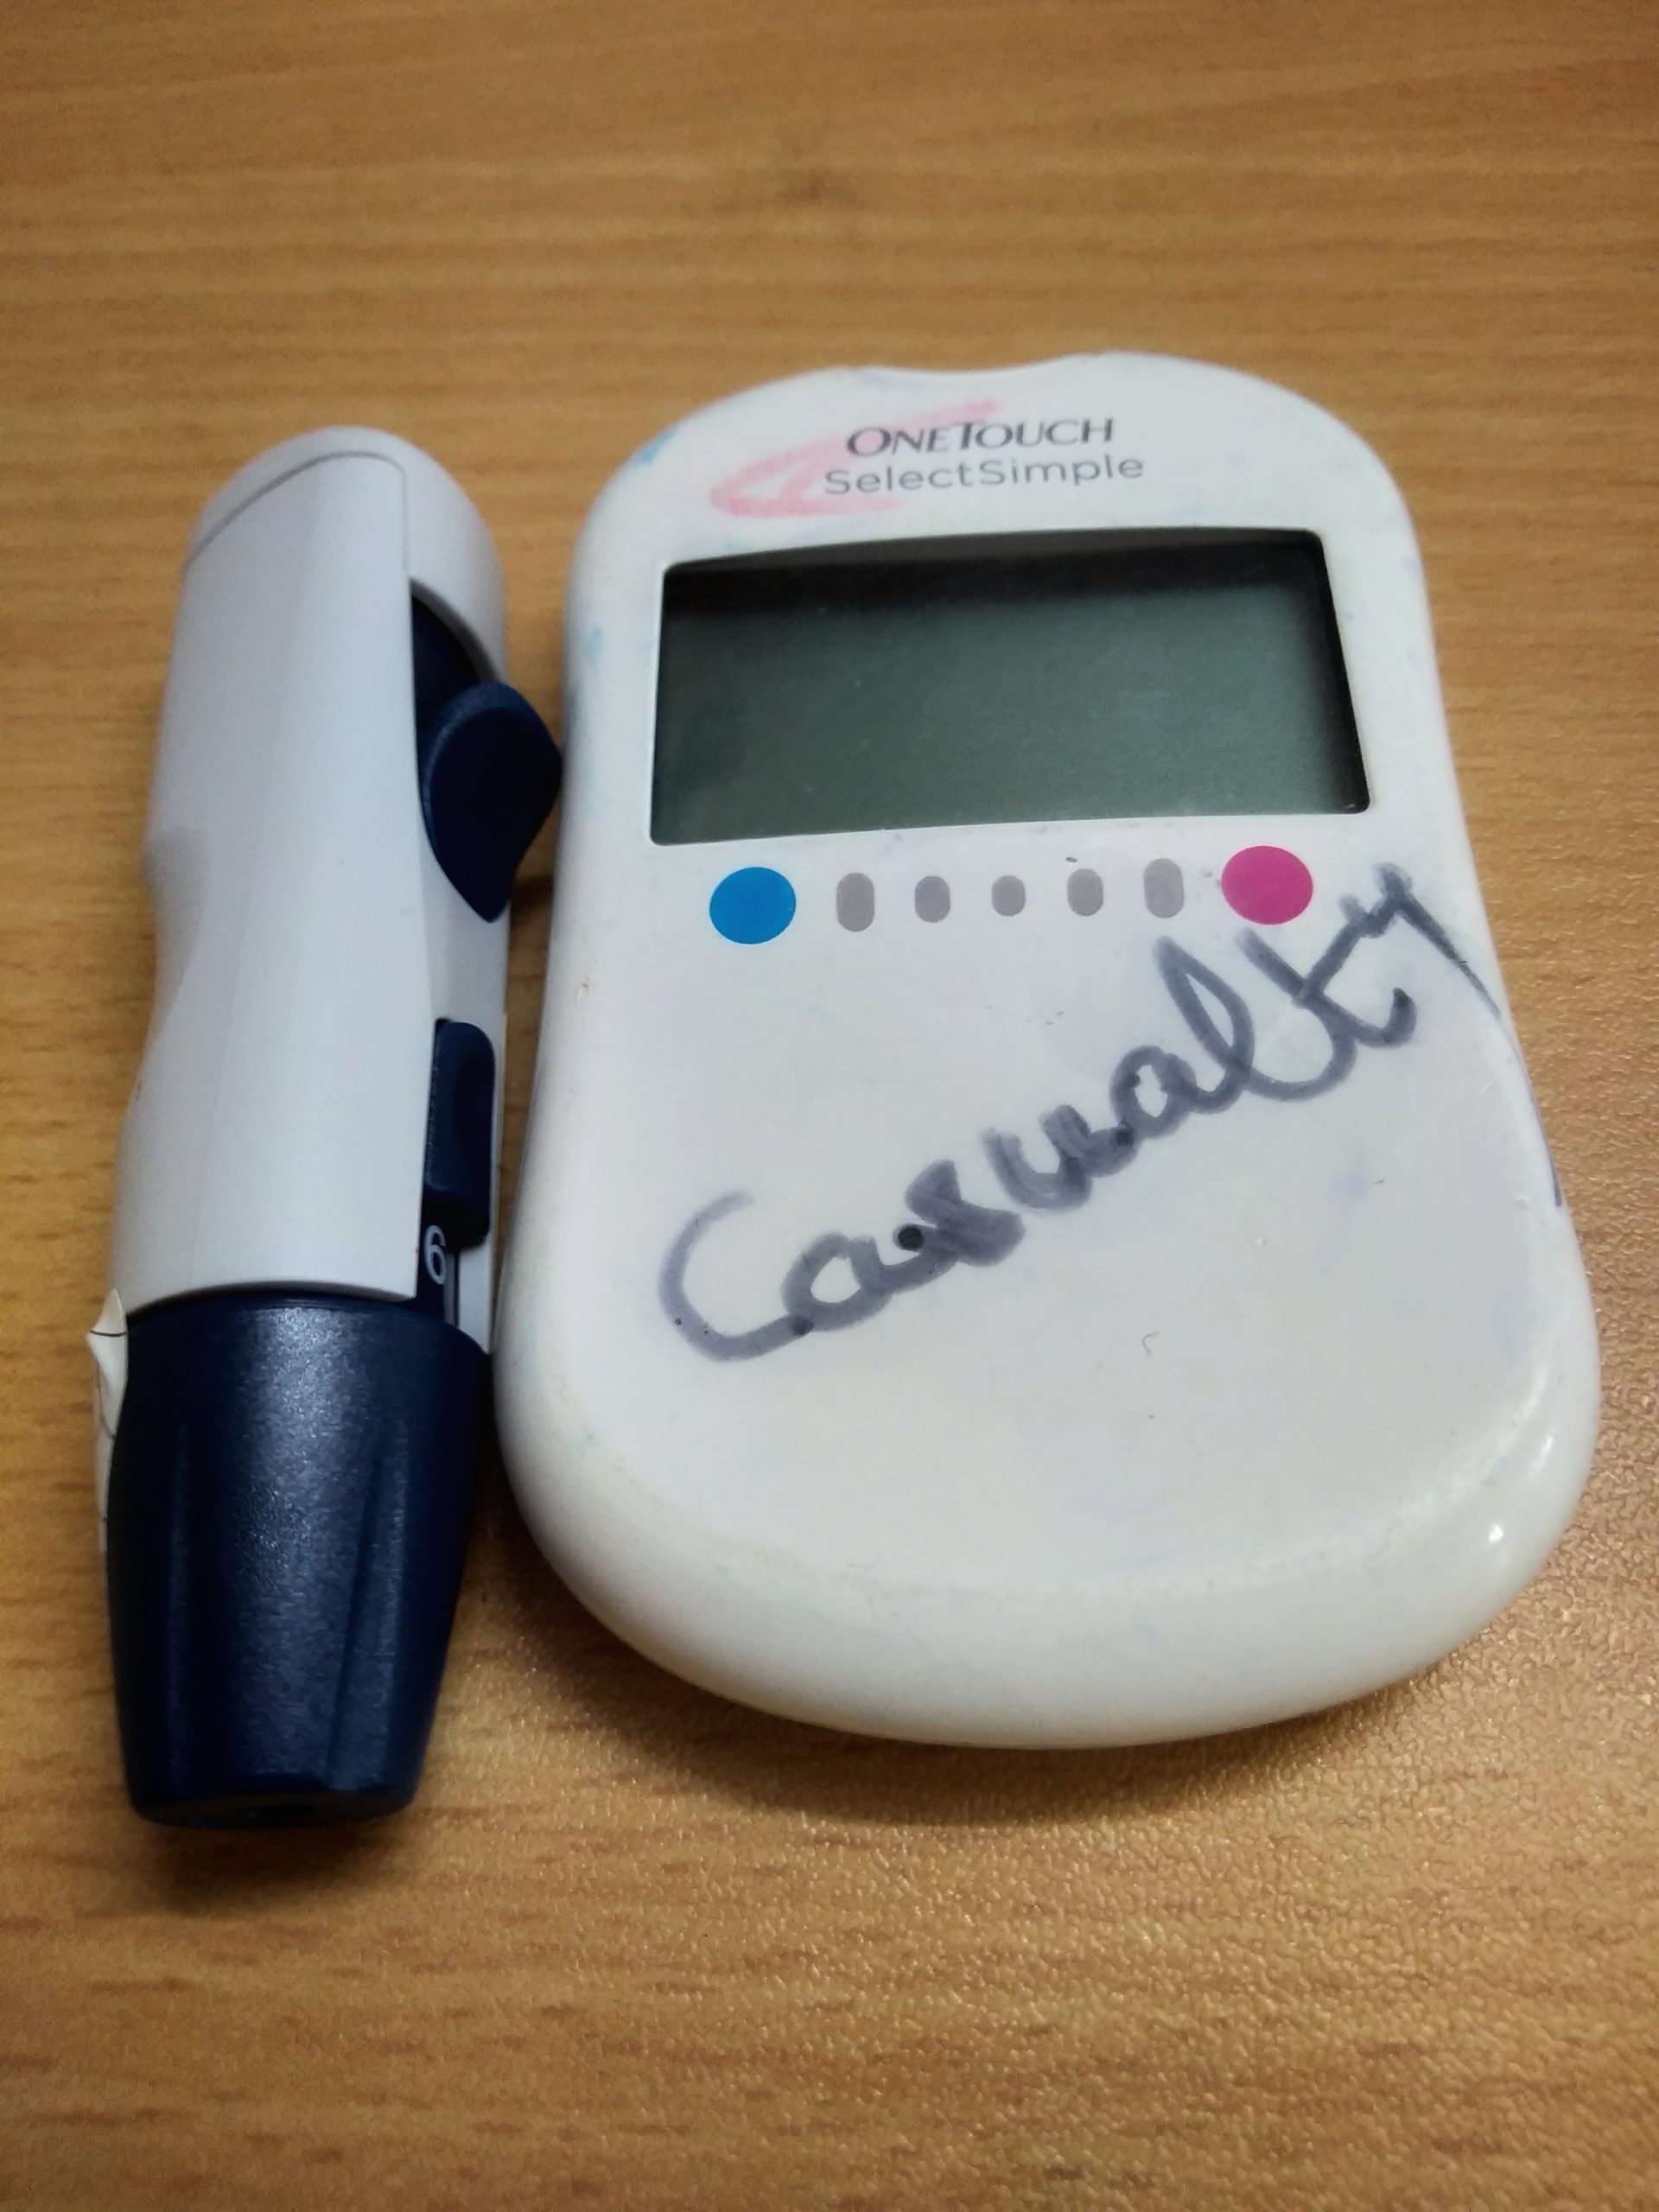 A glucometer with pricker